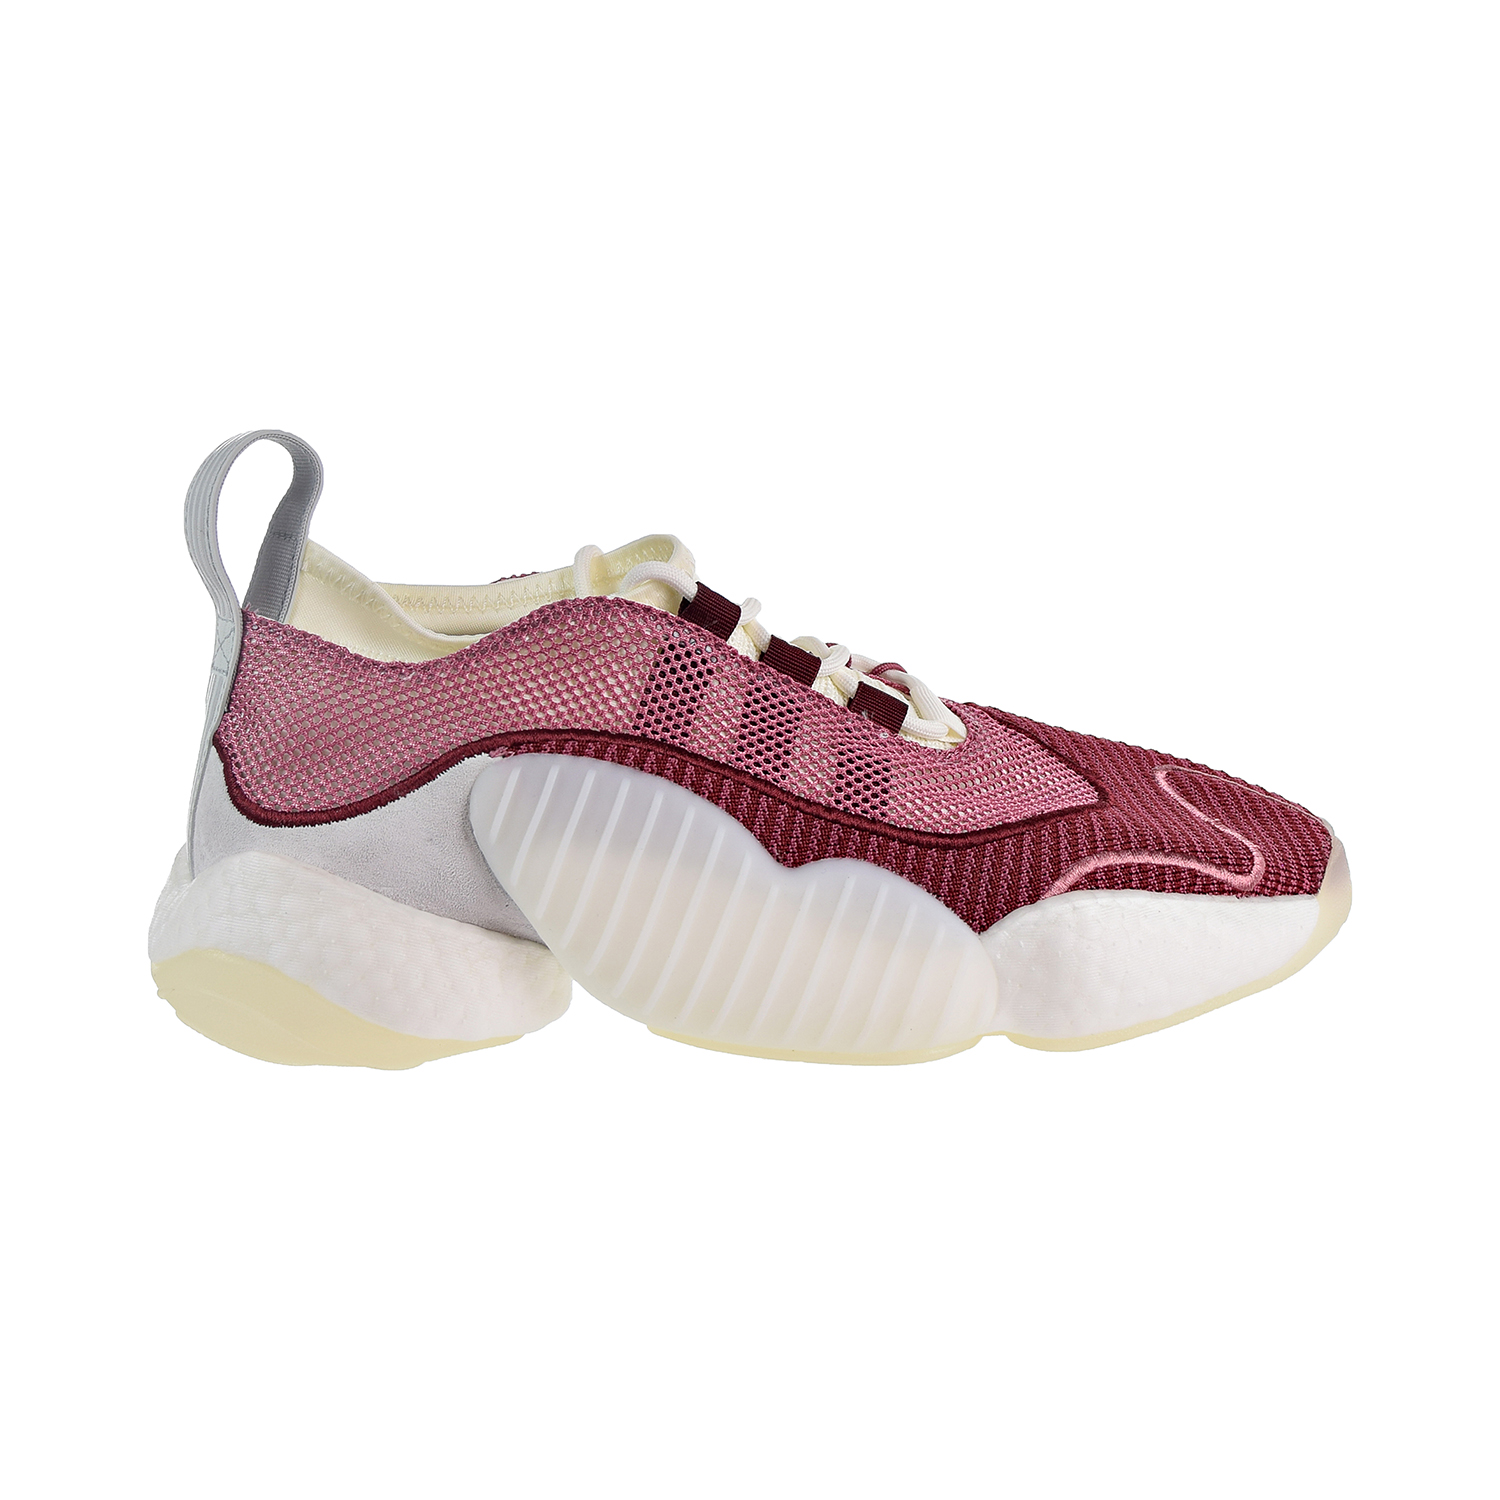 Adidas Crazy BYW II Men's Shoes Trace 